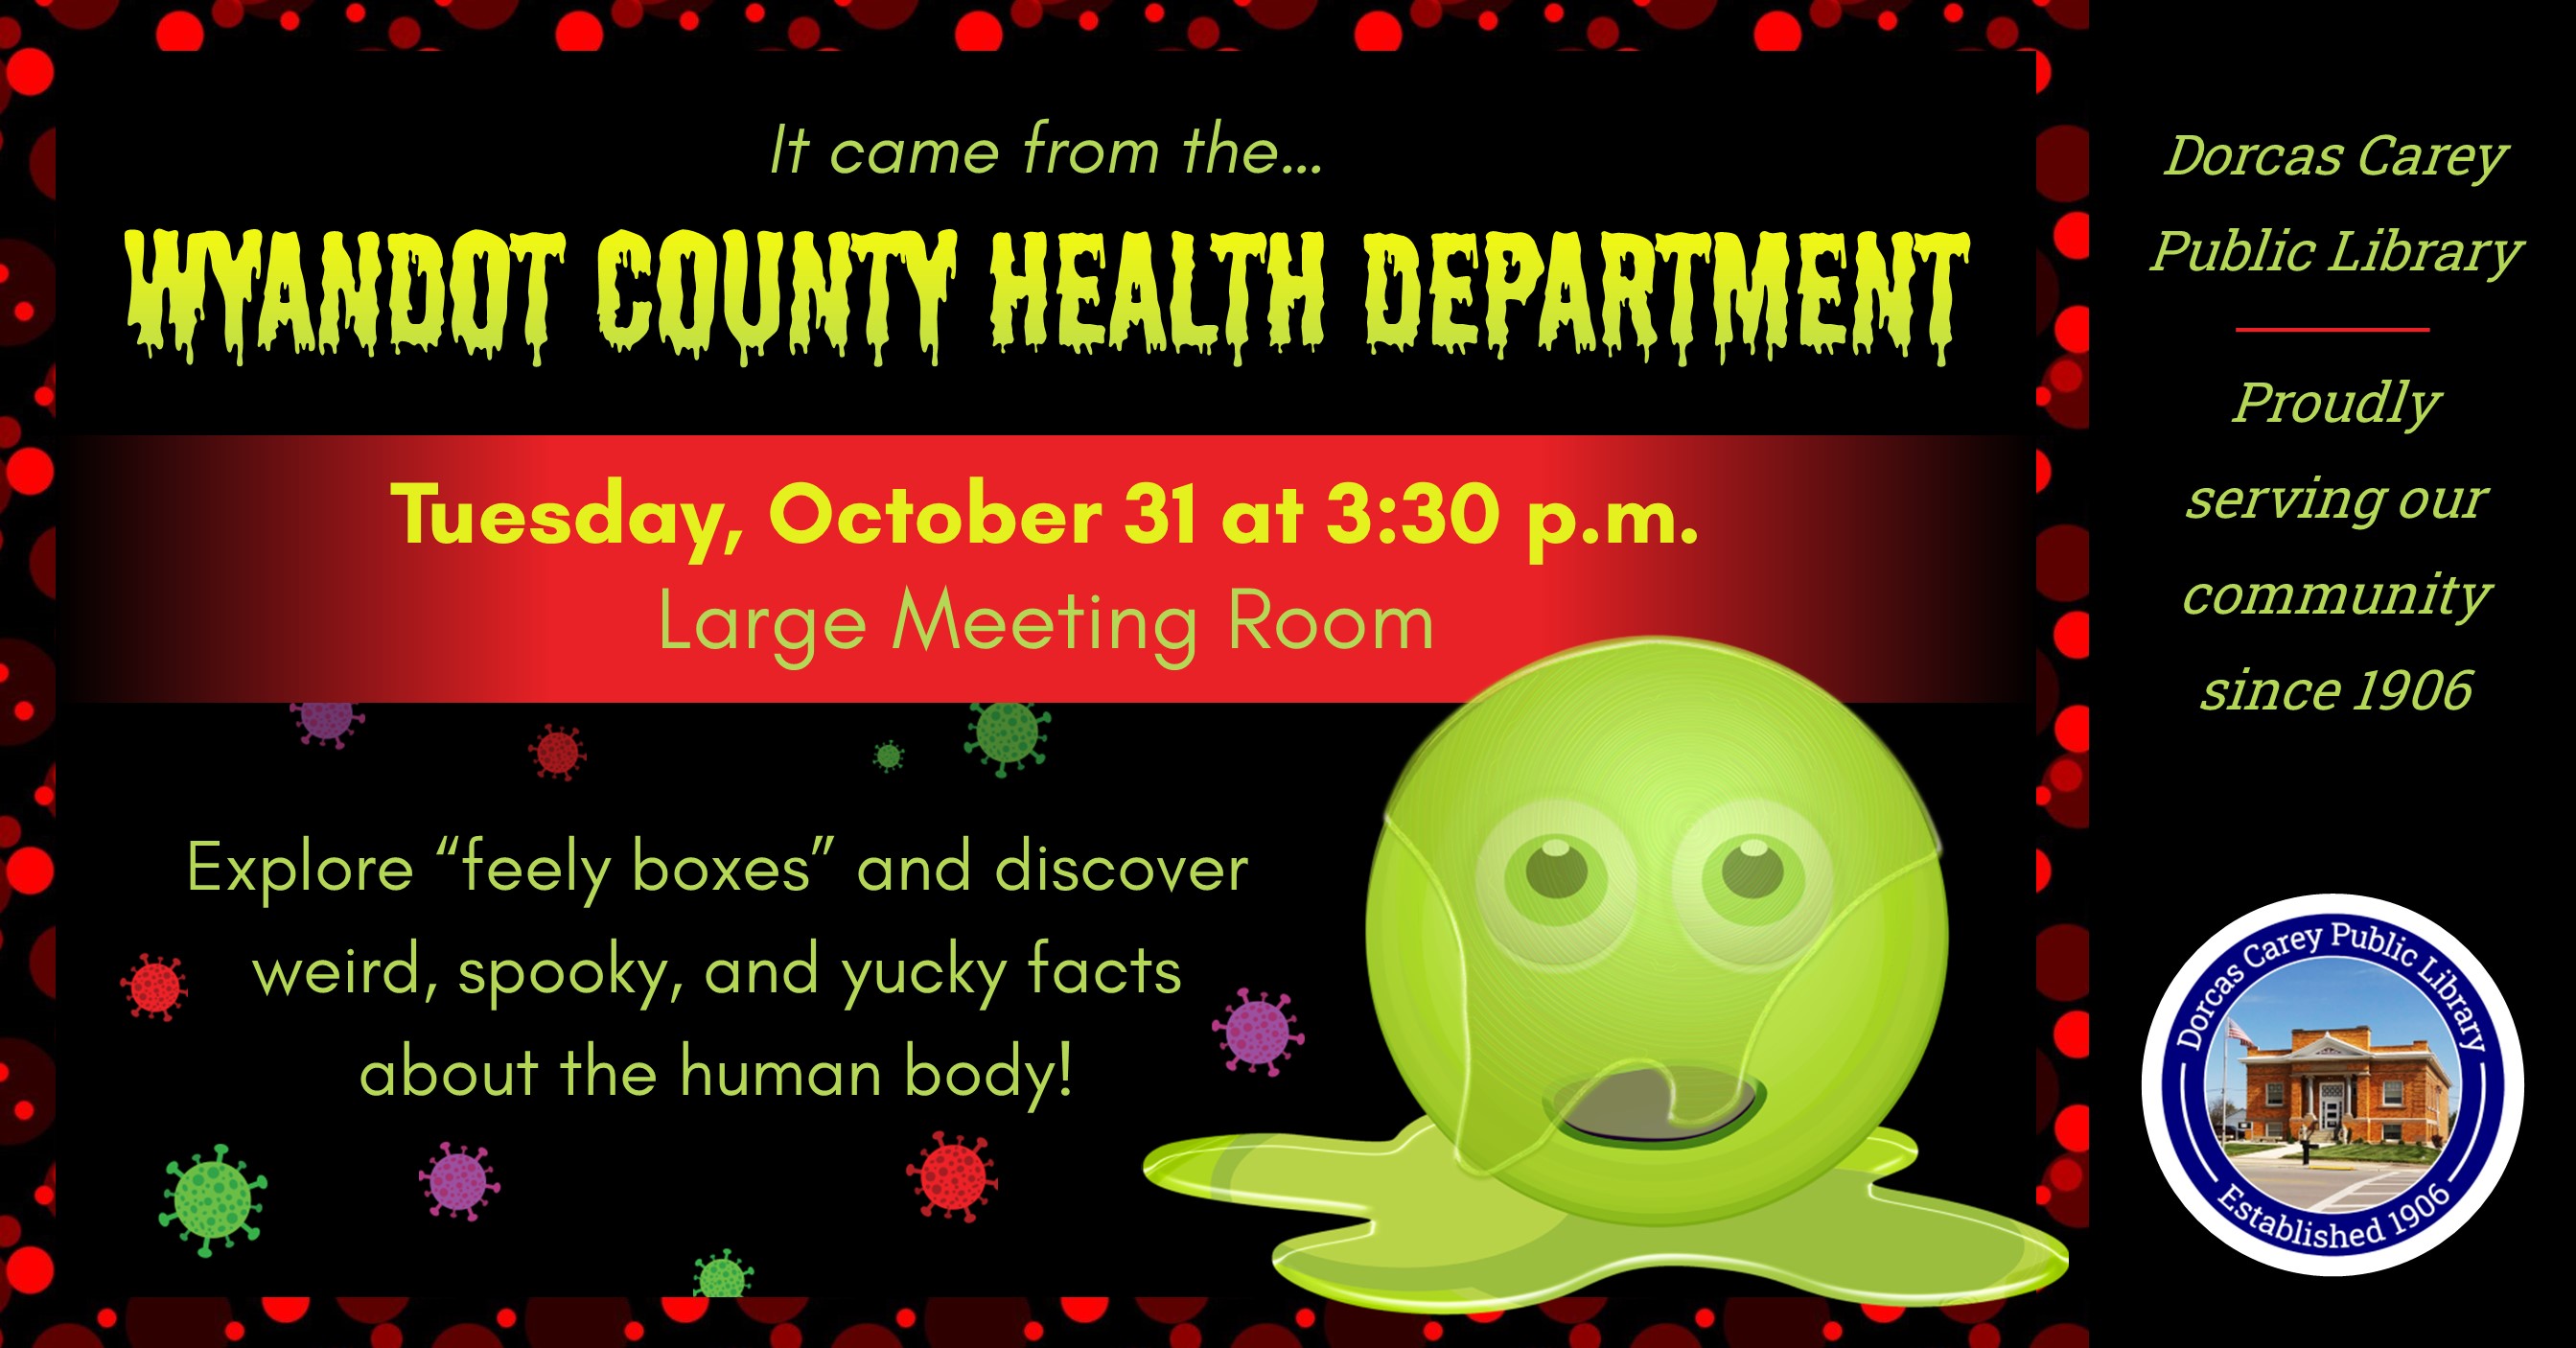 Have fun at the library with the Health Department of Wyandot County.  Learn about weird, spooky and yucky things related to the human body.  Have fun with the “feely boxes” and learn about staying healthy and proper hand washing.